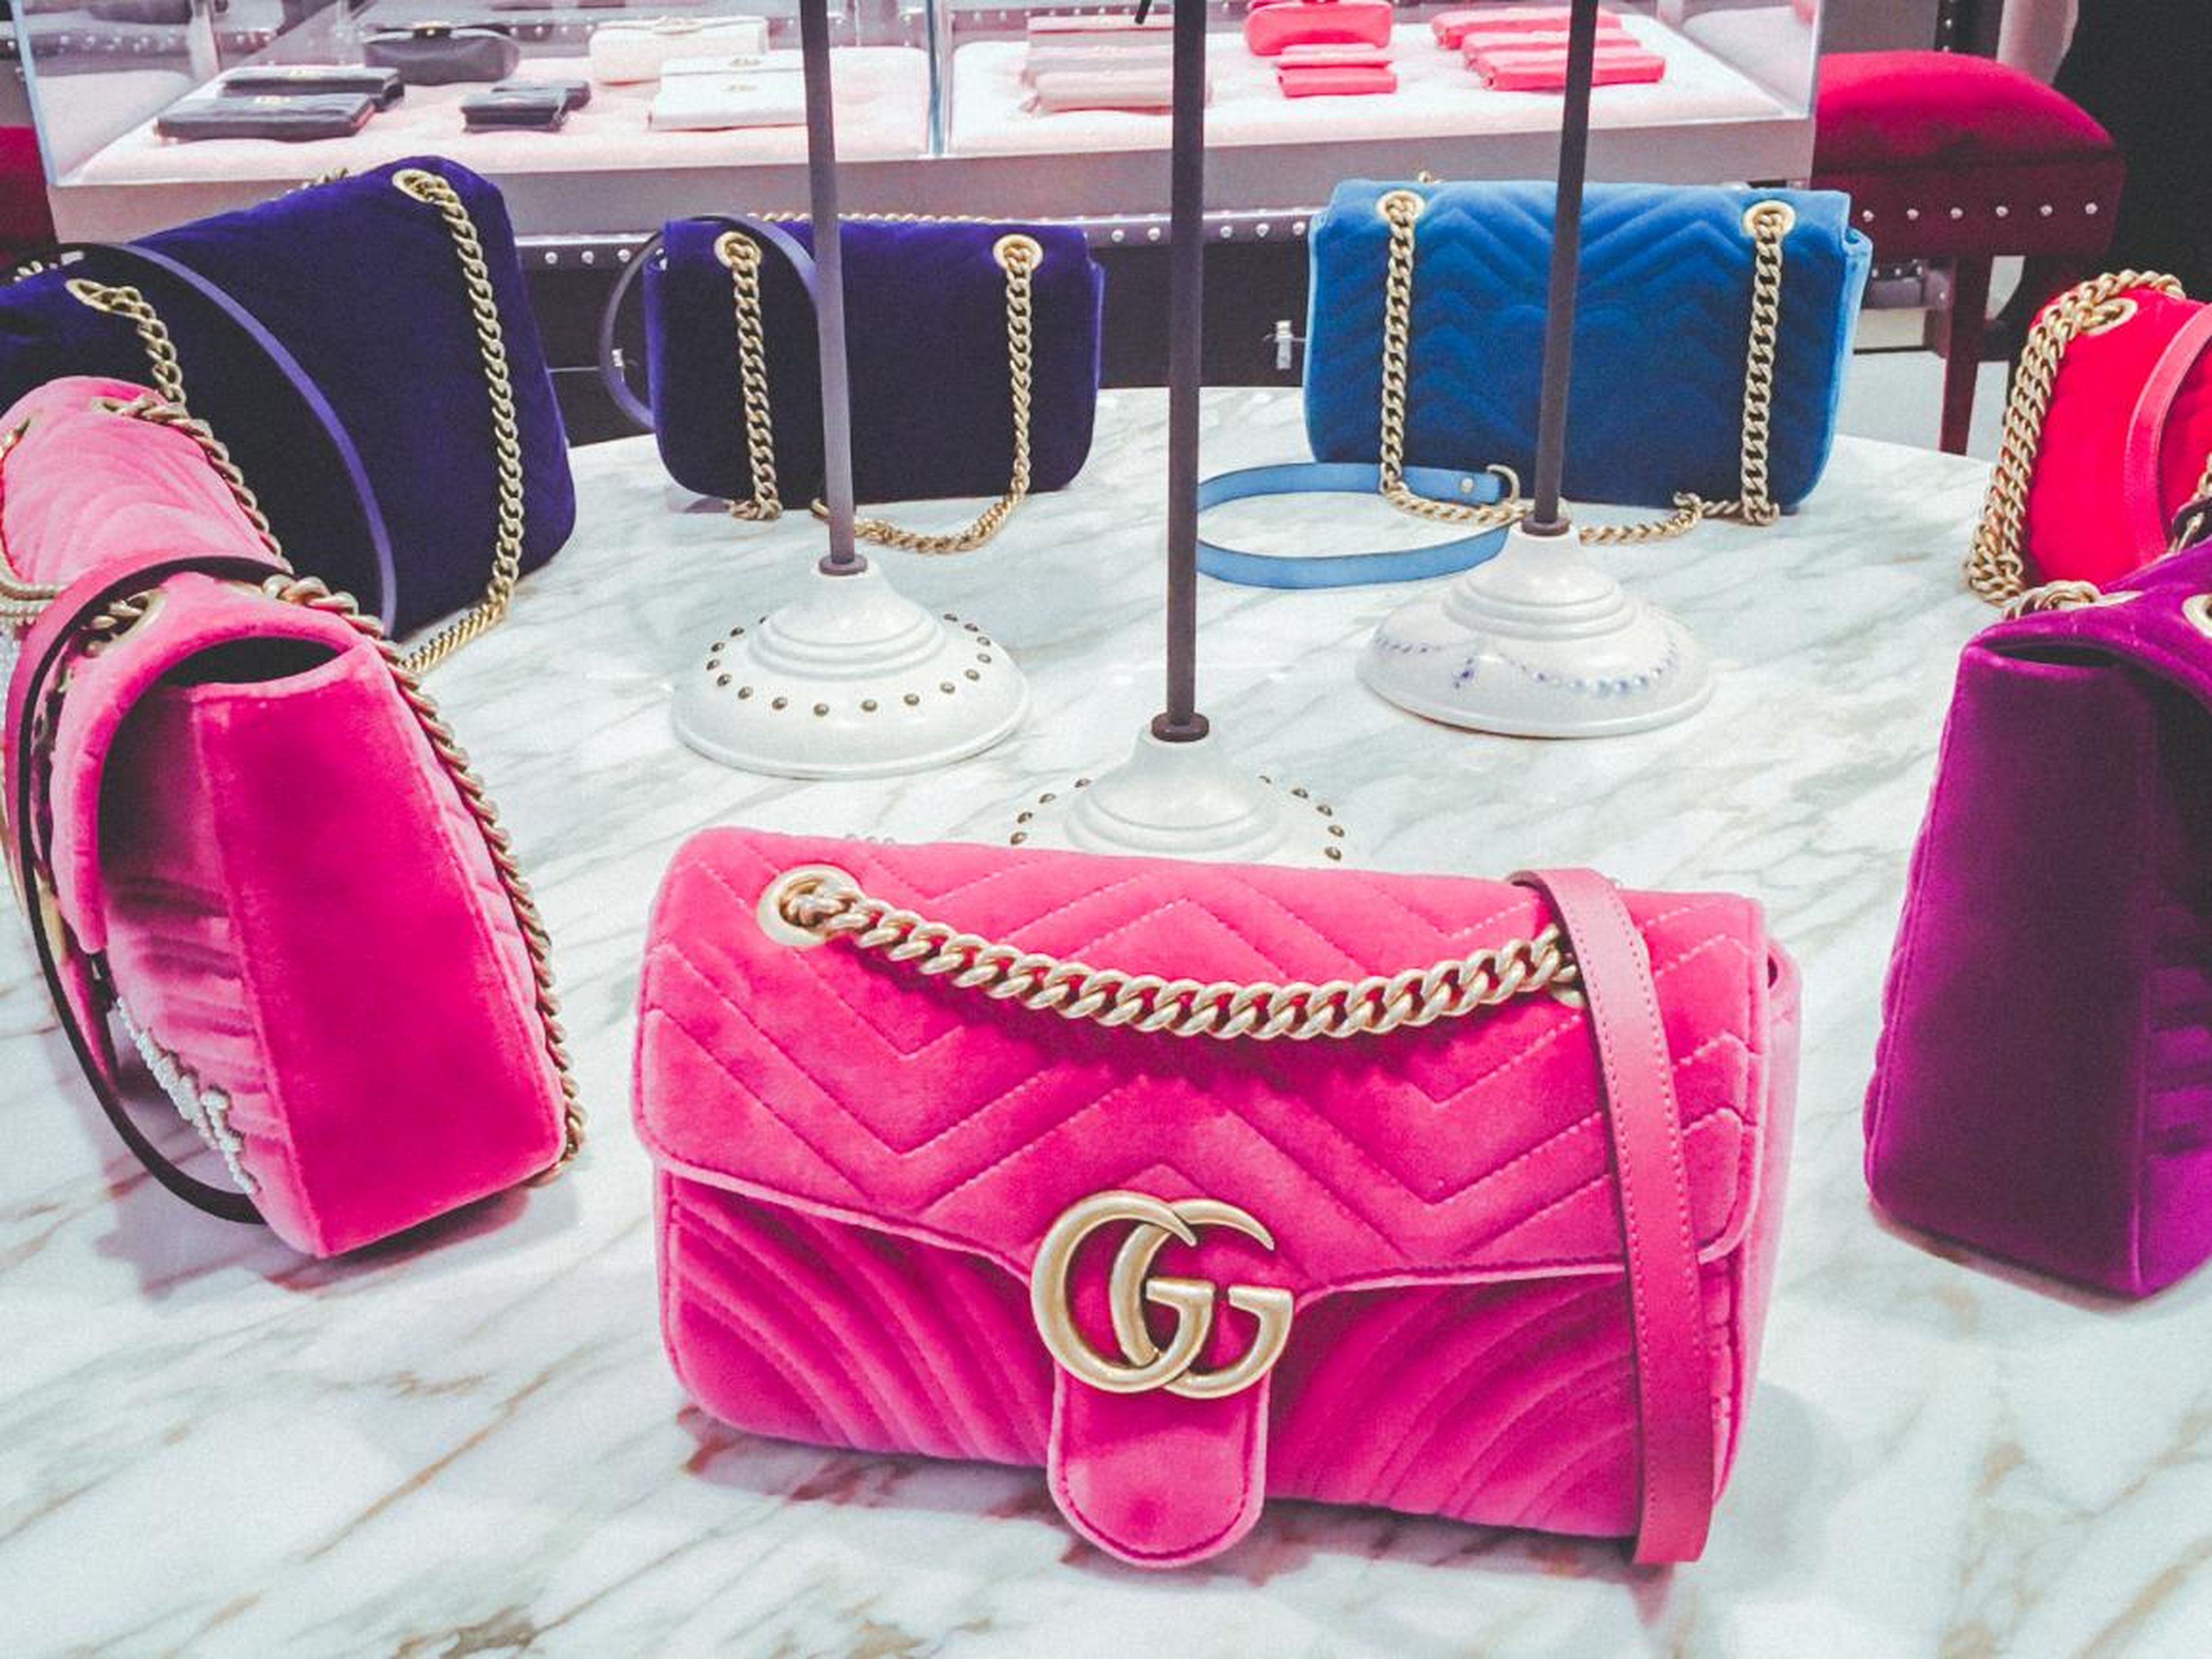 Gucci nearly doubled its sales in 2018.